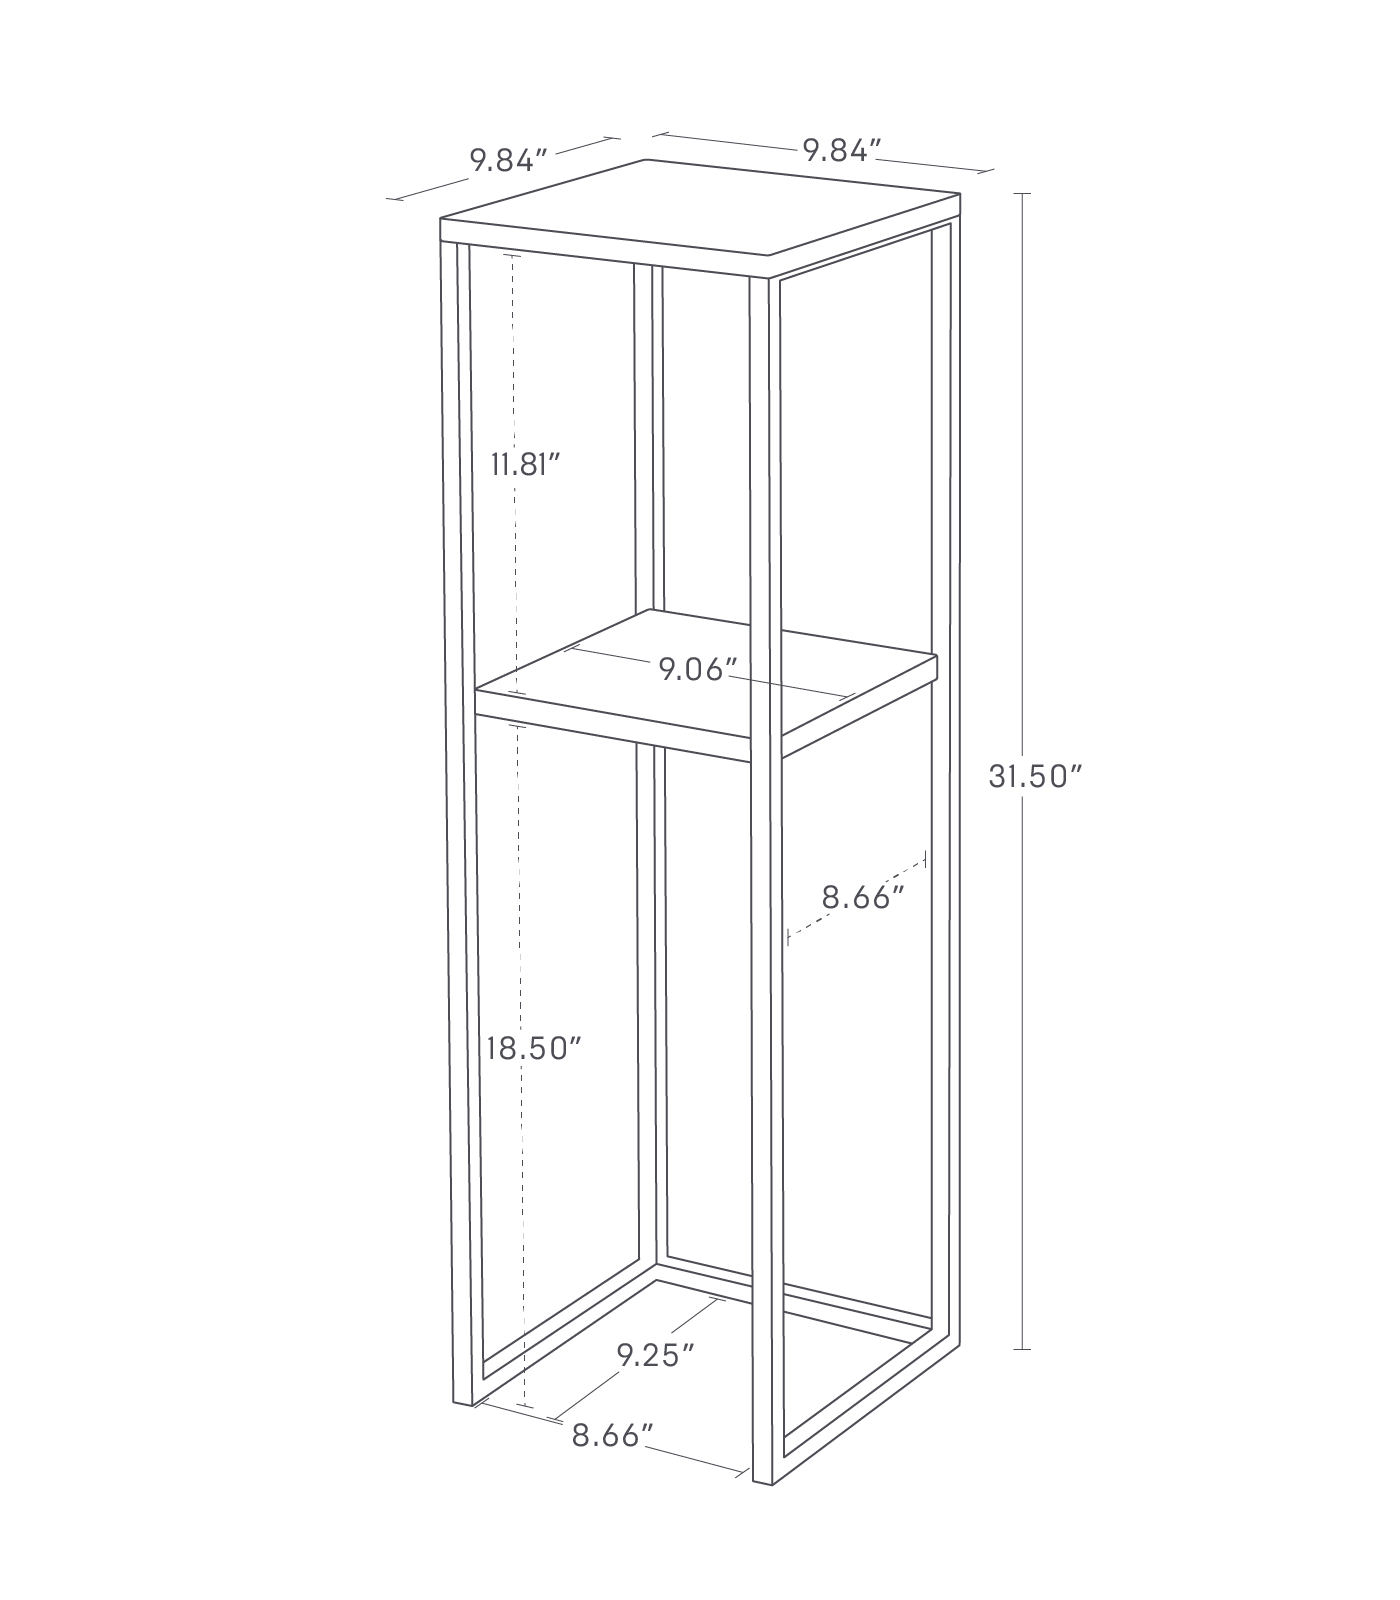 Dimension image for Two-Tier Display & Storage Shelf showing length of 9.84